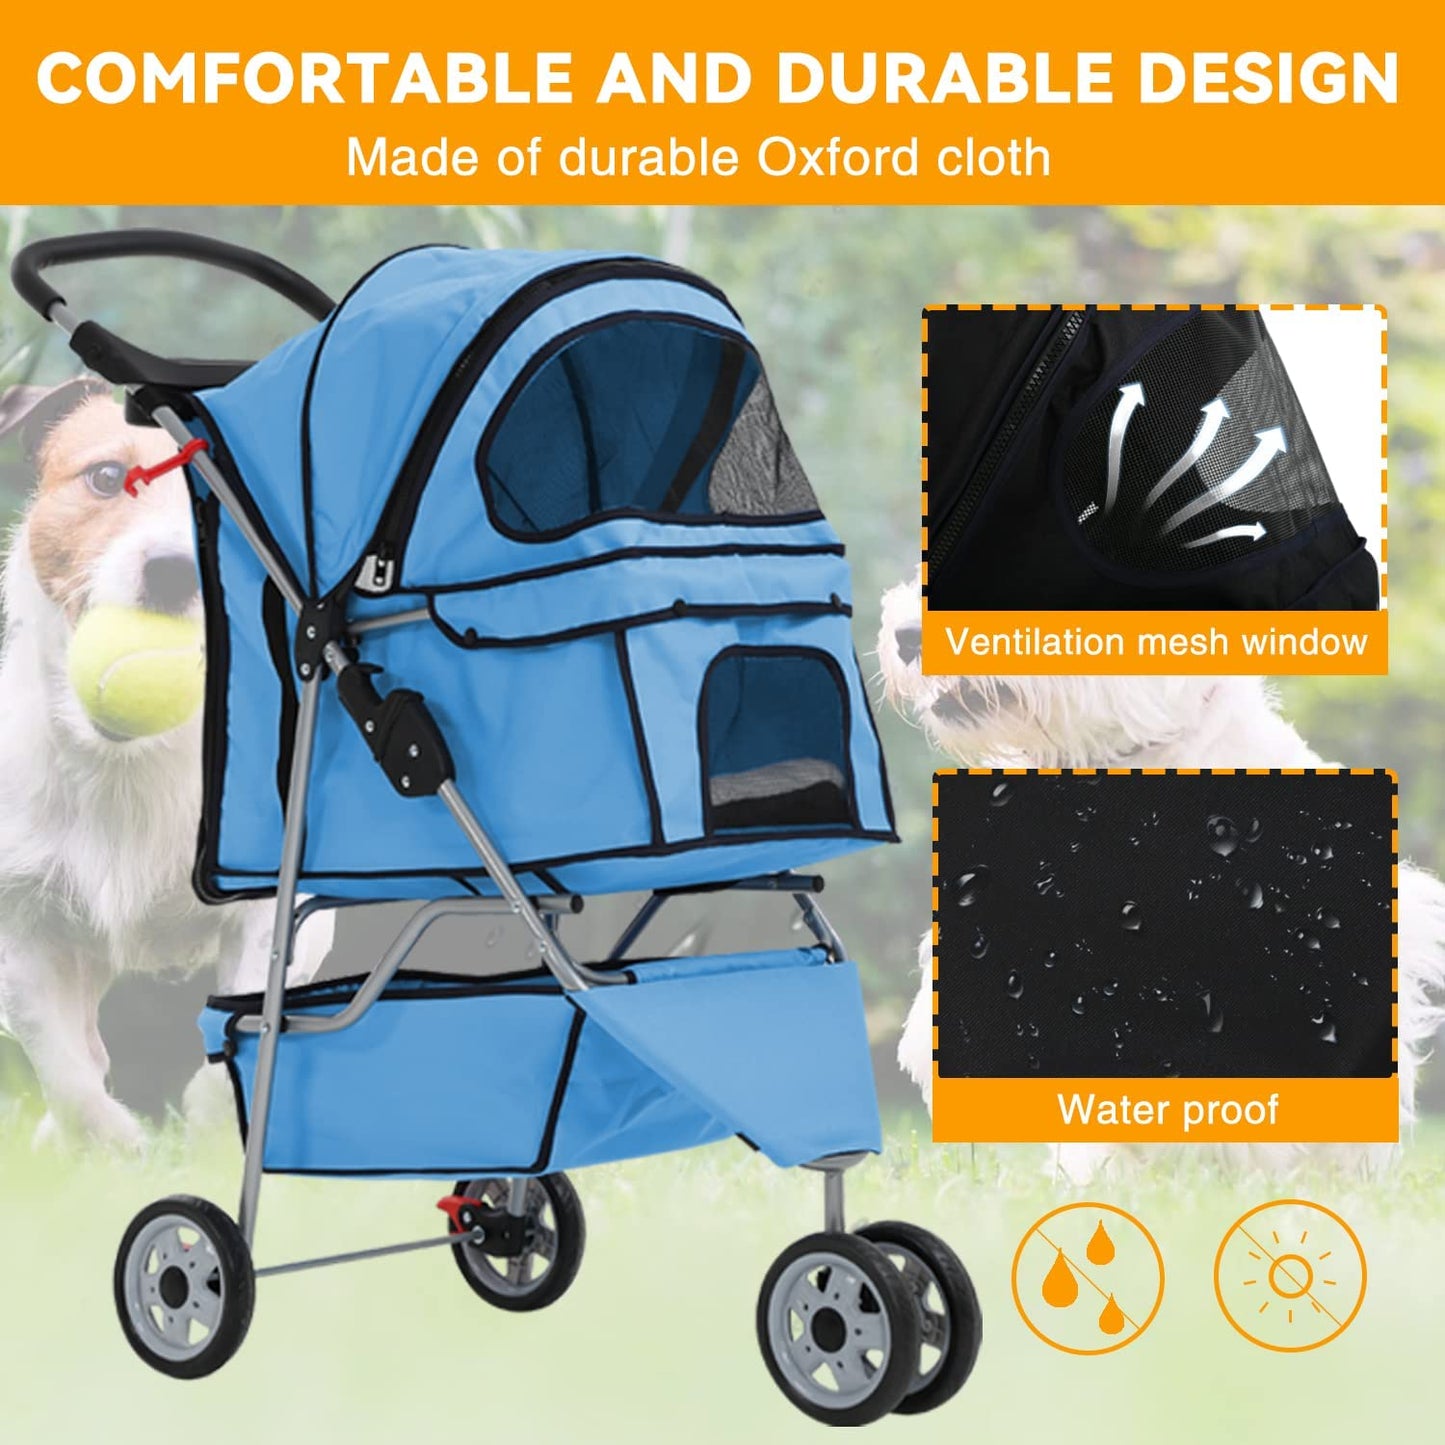 Folding Dog Stroller, 3 Wheels Pet Strollers Pet Gear for Small Medium Cats Dogs Puppy with Storage Basket, Cup Holder,Lightweight Blue 35.04Inchx17.32Inchx38.58Inch